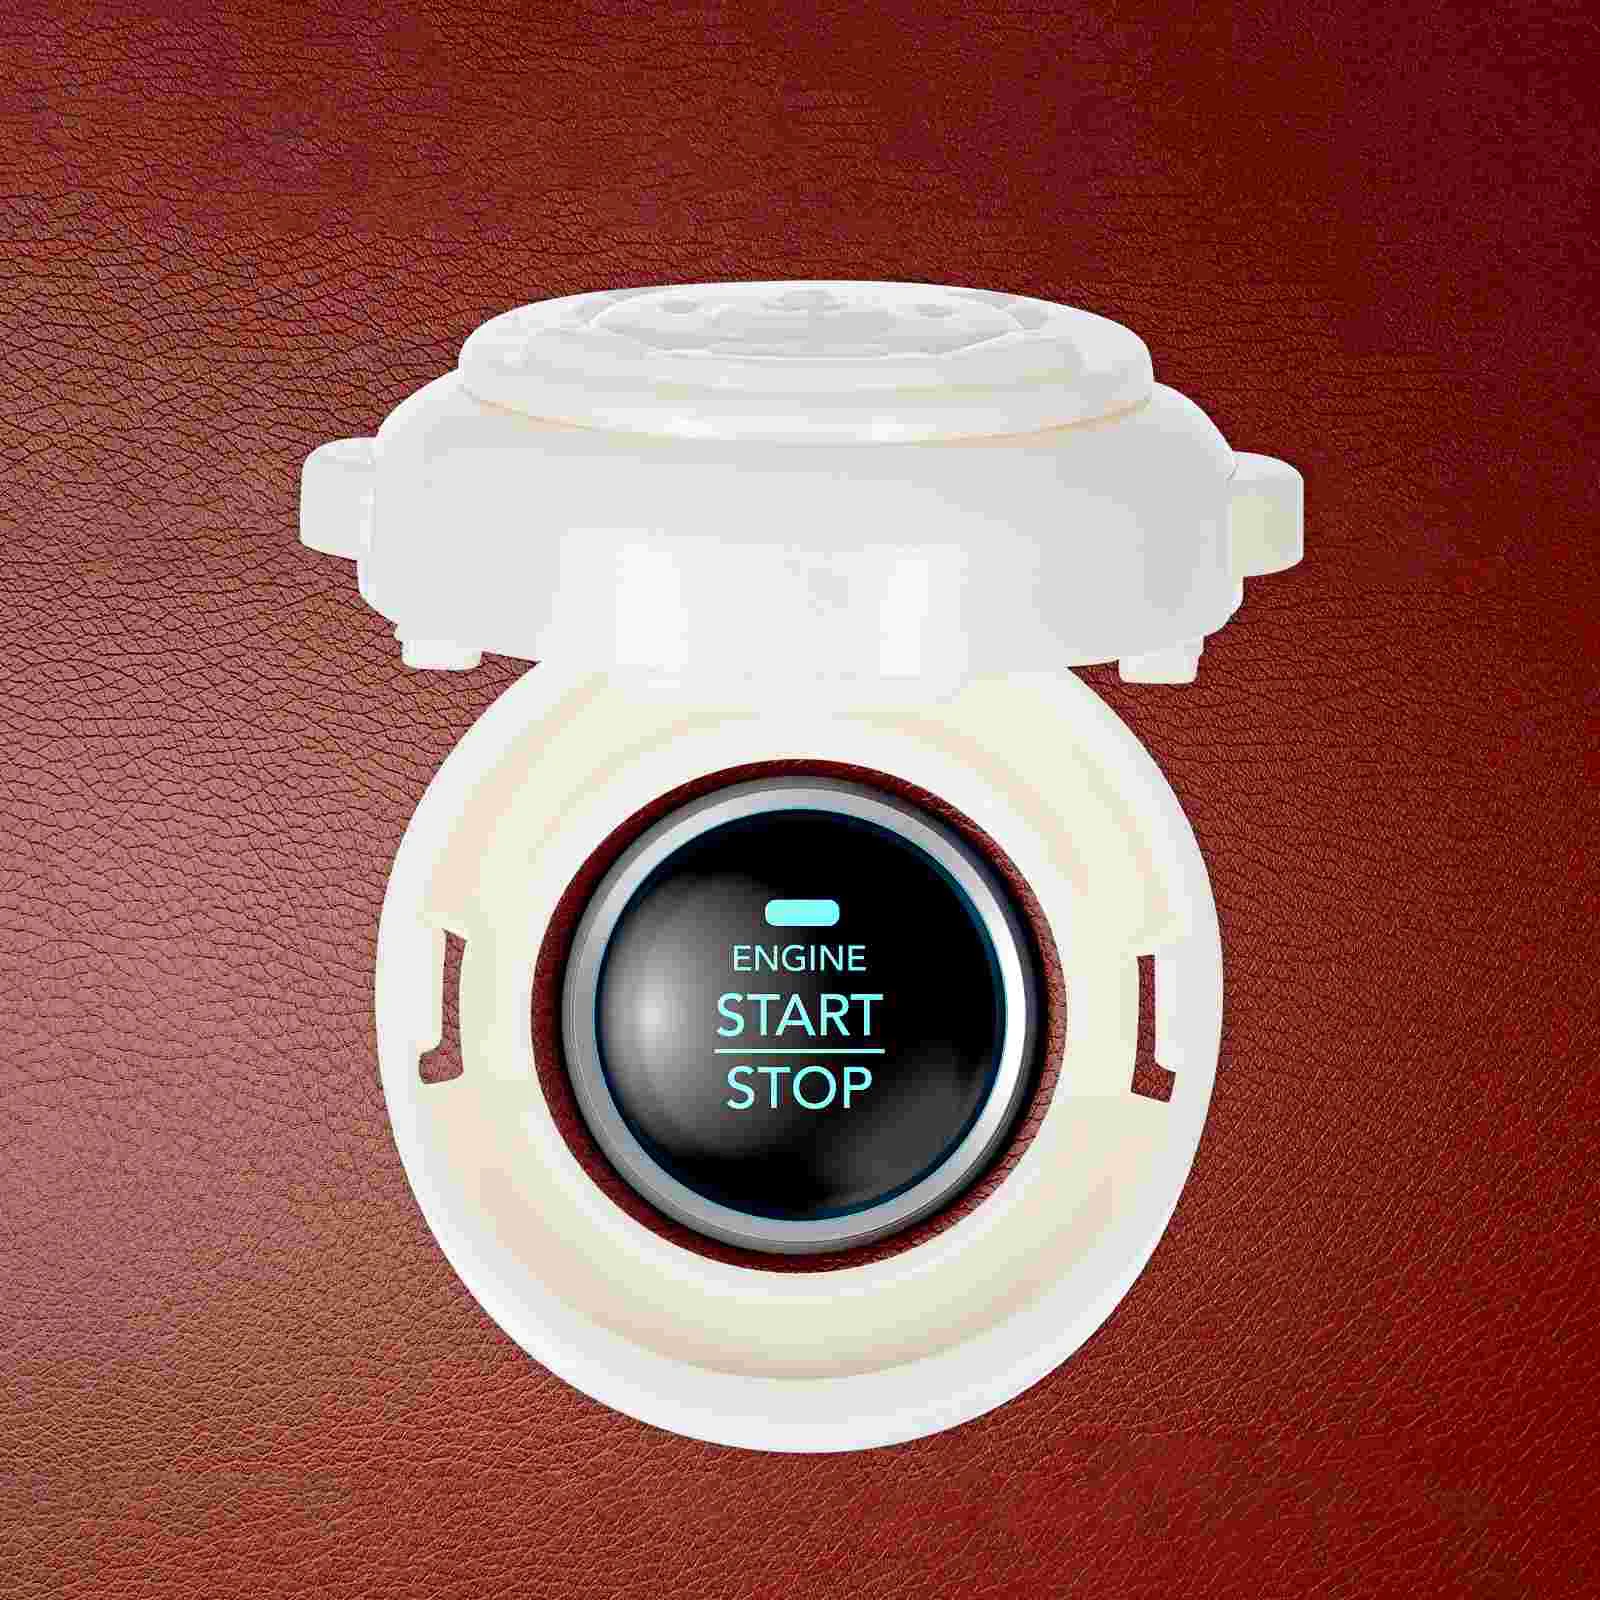 4 Guards Start Button Protection Cover Child Safety Cover Safety Pressing Device for Stove Washing Machine Car Computer White images - 6